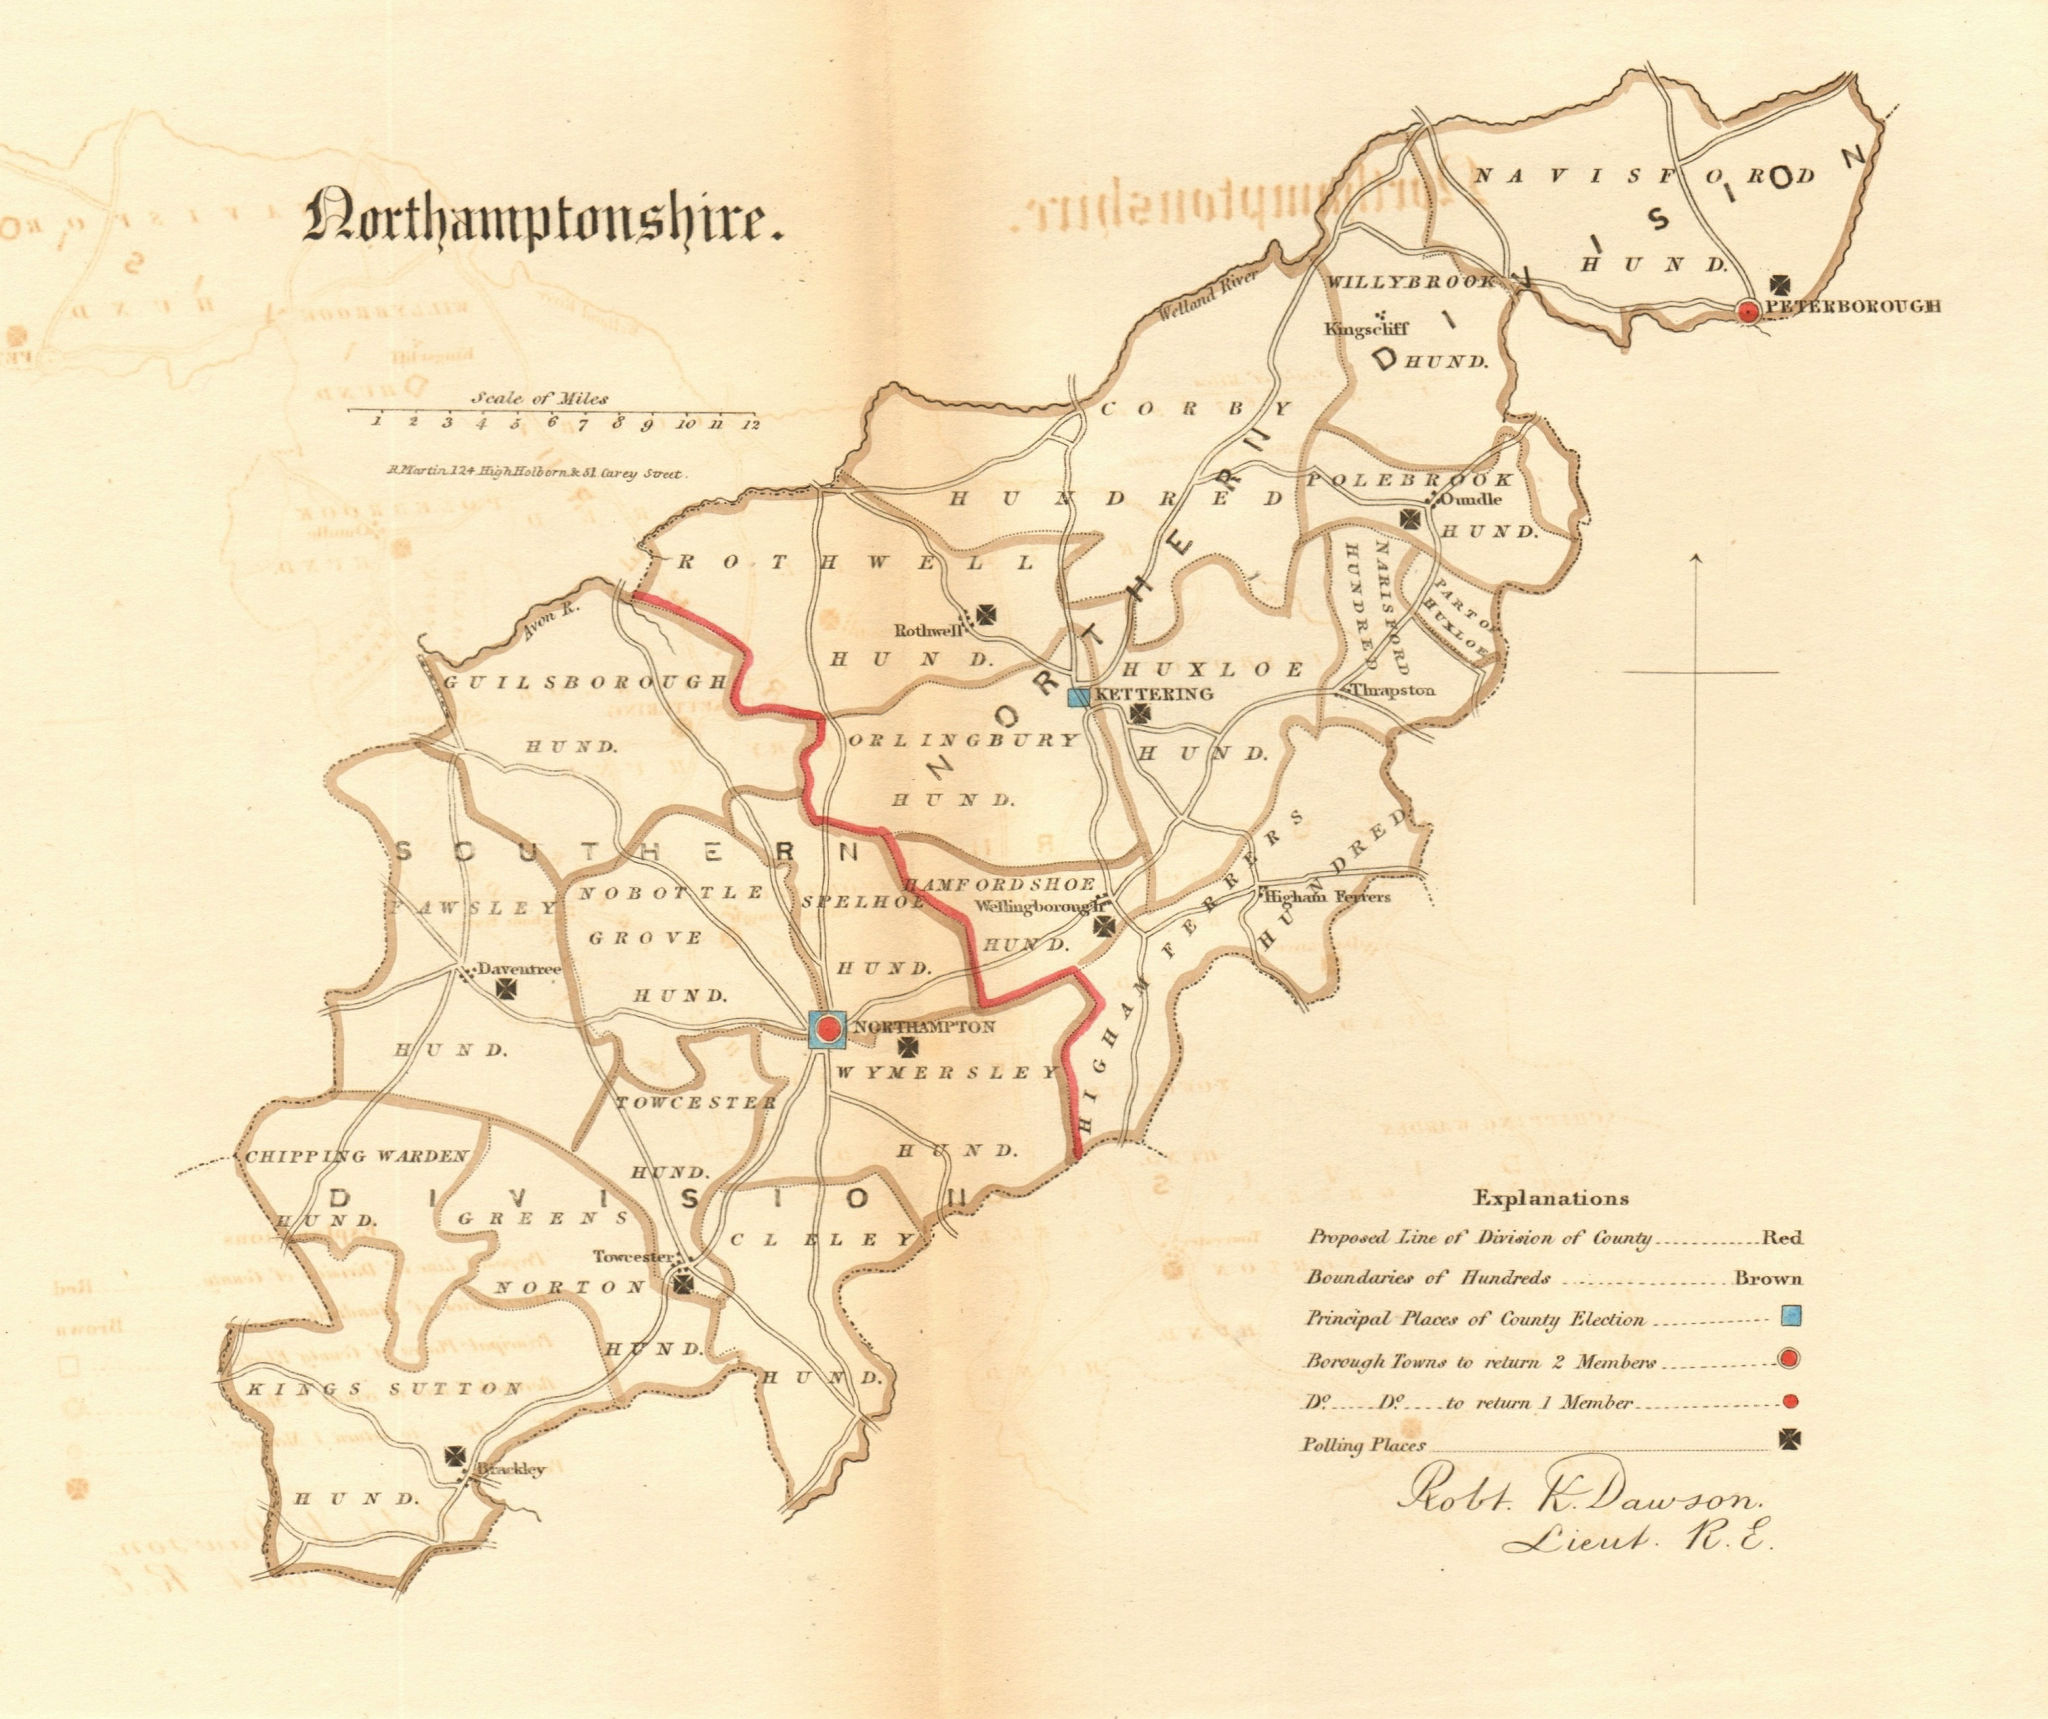 Northamptonshire county map. Divisions boroughs electoral REFORM ACT.DAWSON 1832